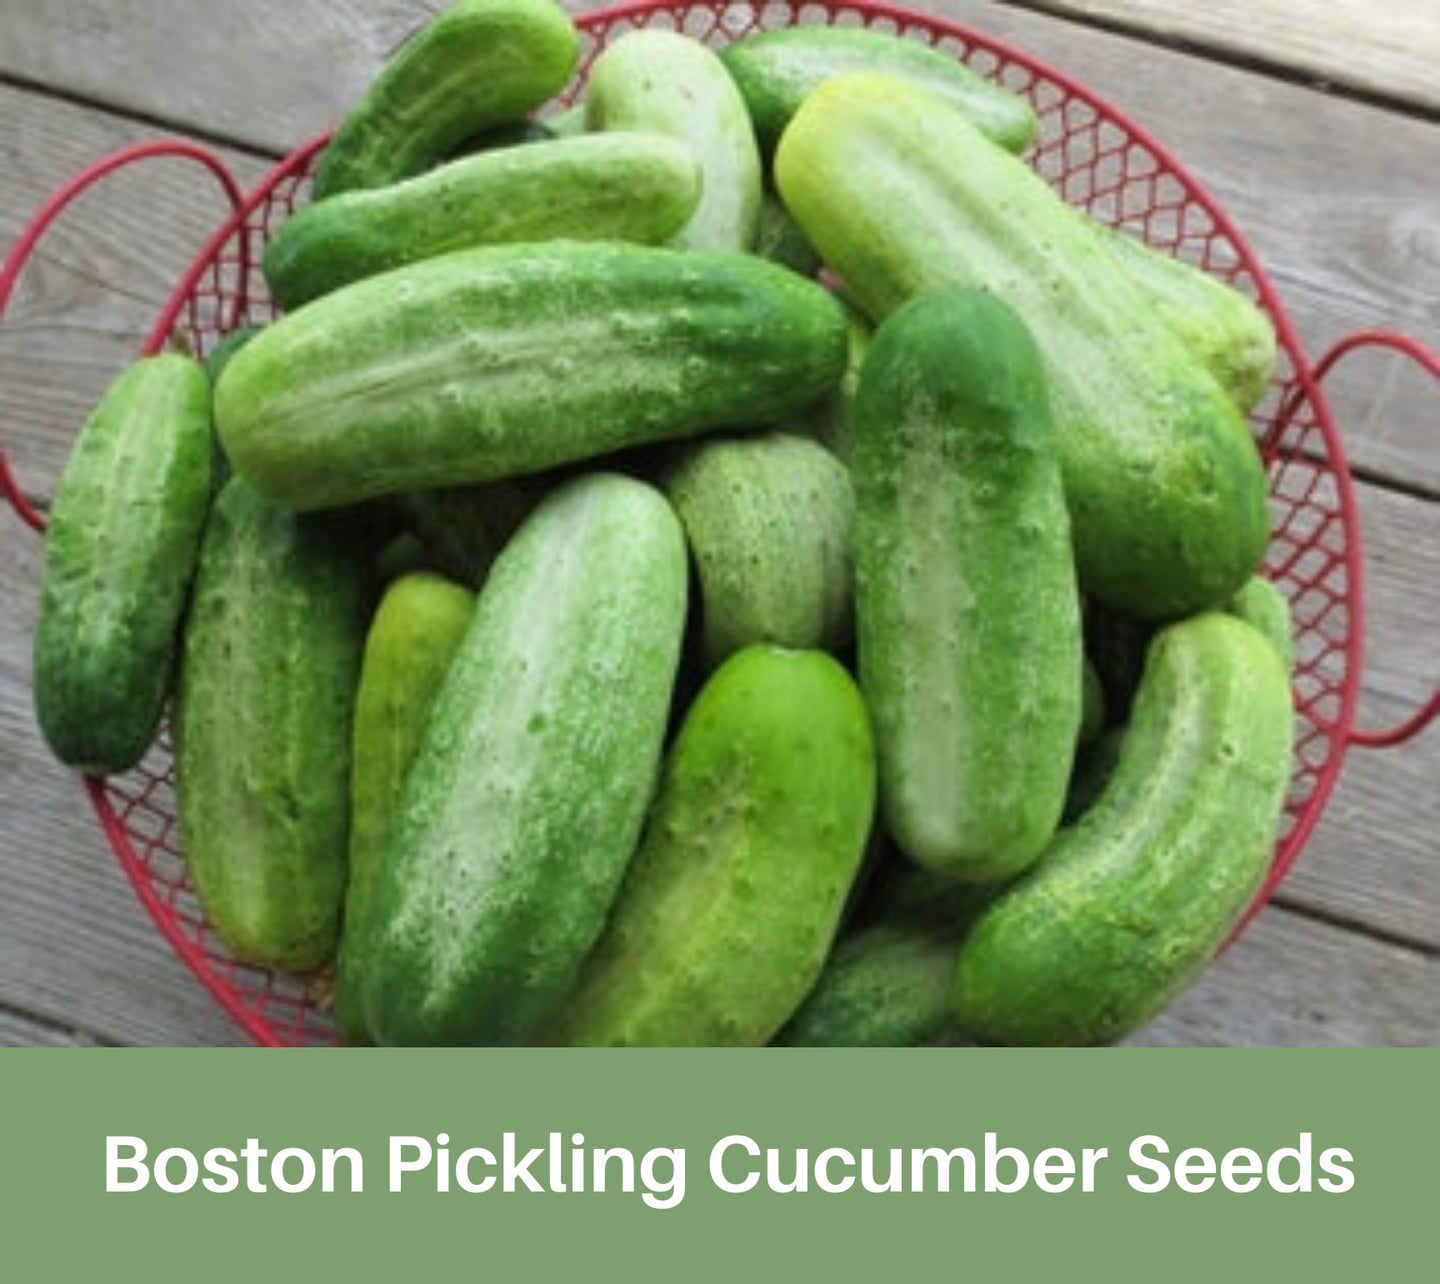 Heirloom Cucumbers, Boston Pickling, Seeds, Organic, Crispy and Delicious